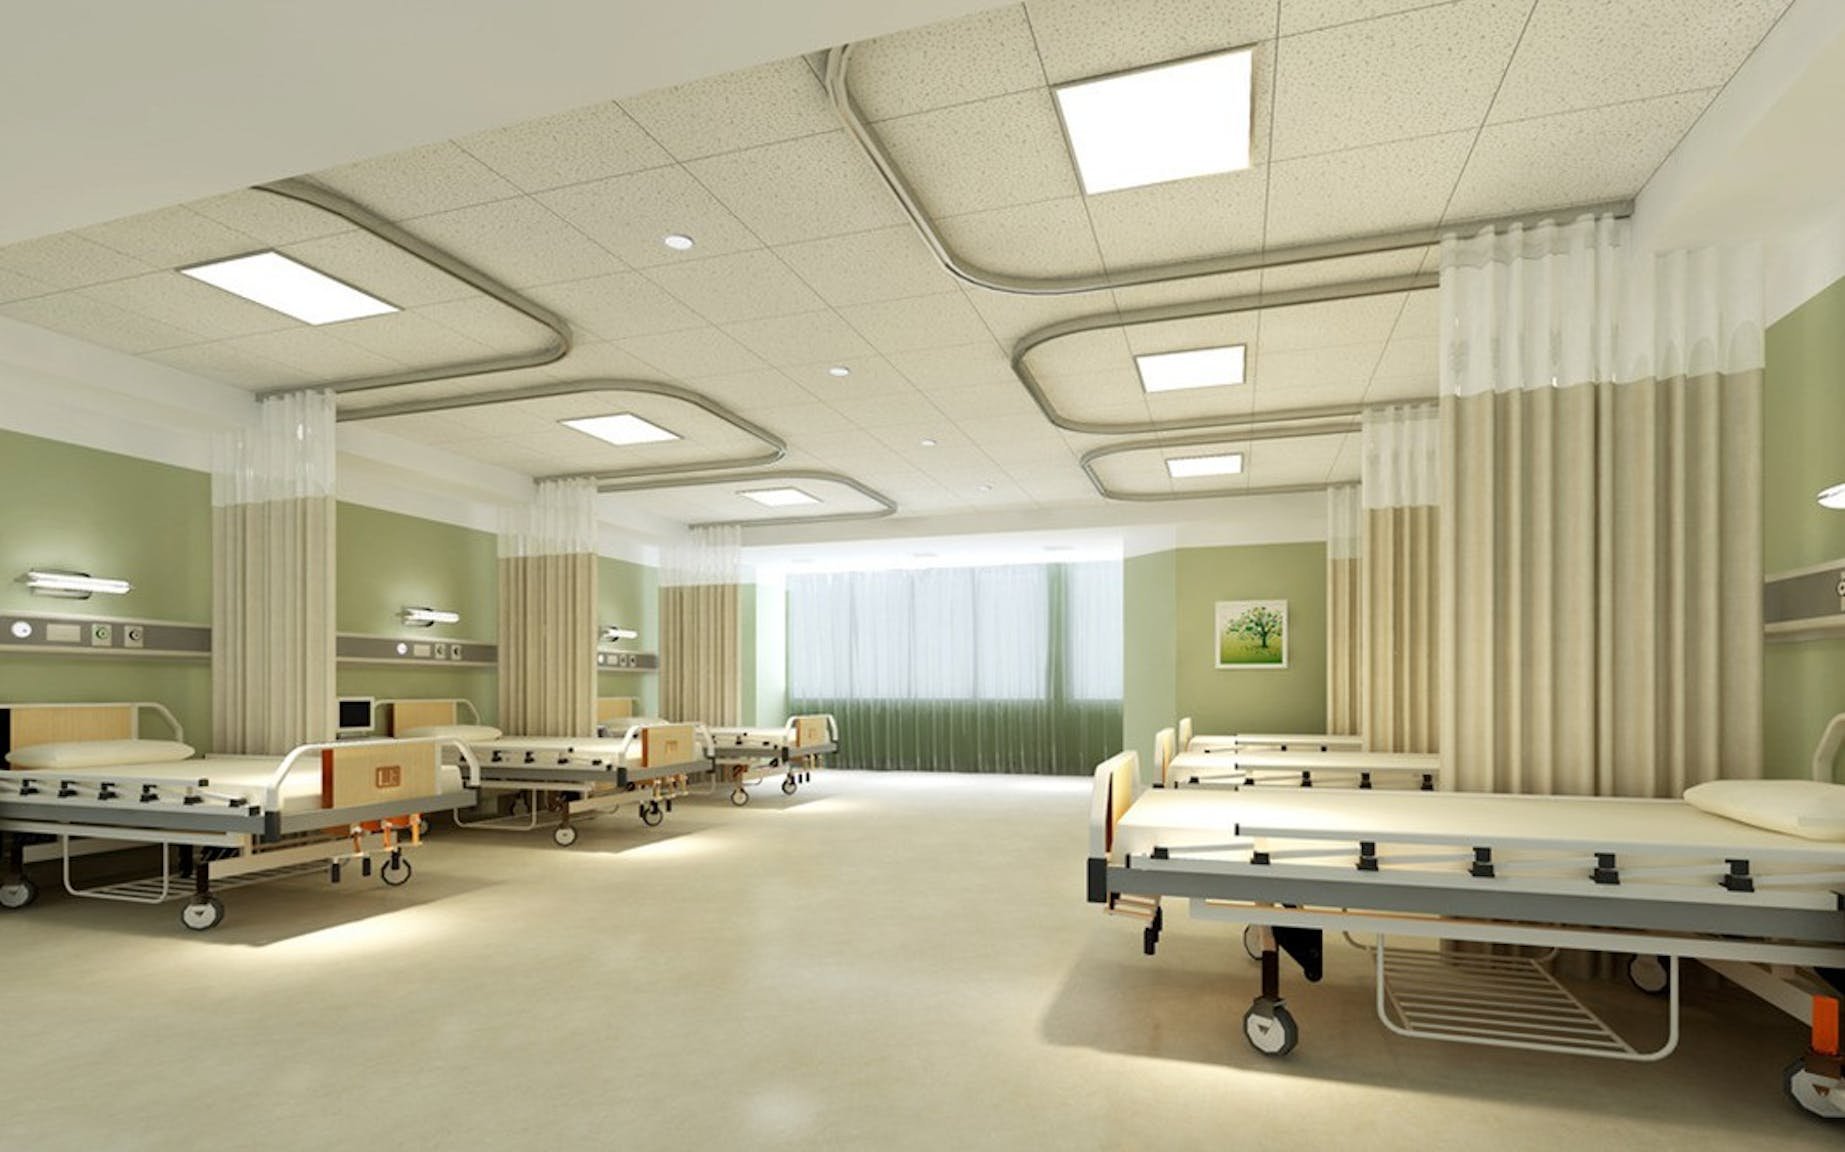 Creating A Comfortable and Healing Environment In Hospital Restrooms